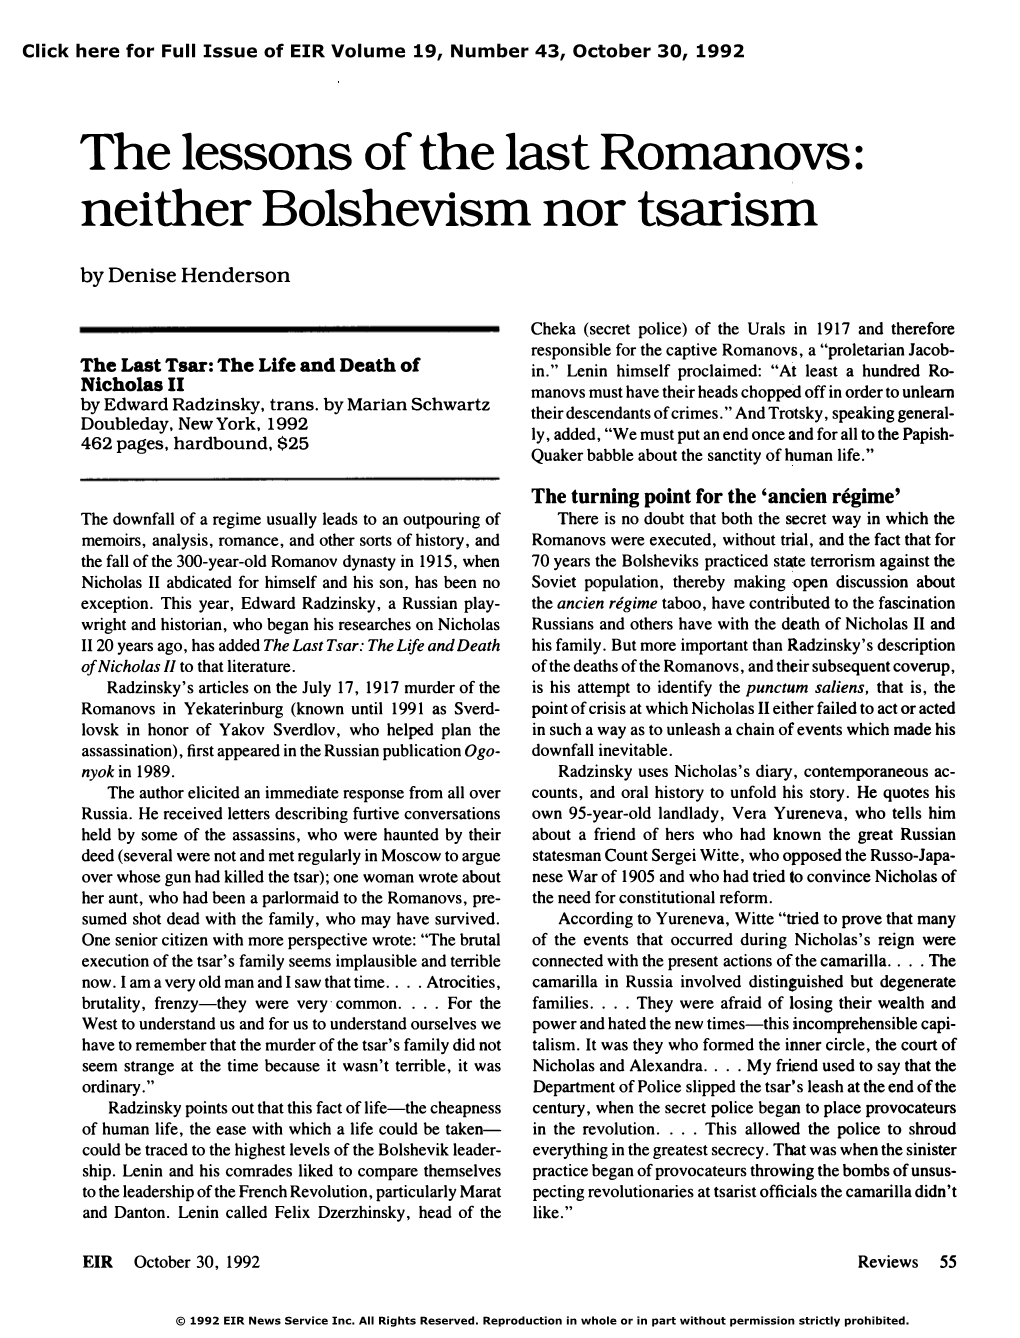 The Lessons of the Last Romanovs: Neither Bolshevism Nor Tsarism